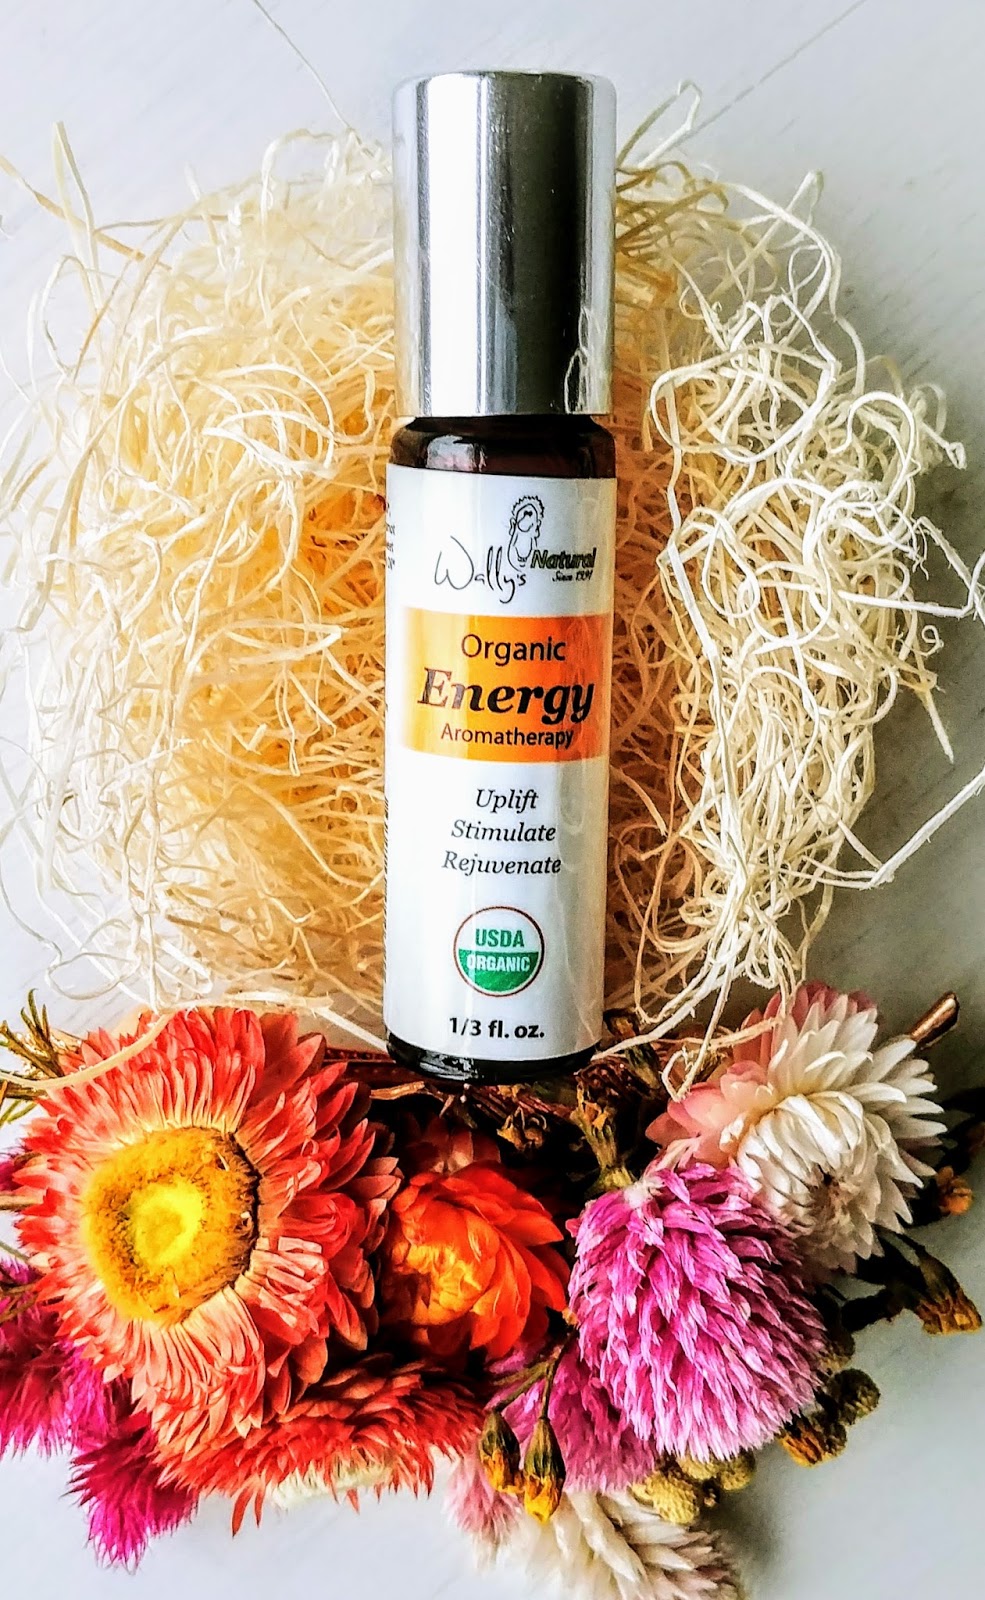 An organic energy aromatherapy rollerball by Wally's Natural on a flower scene